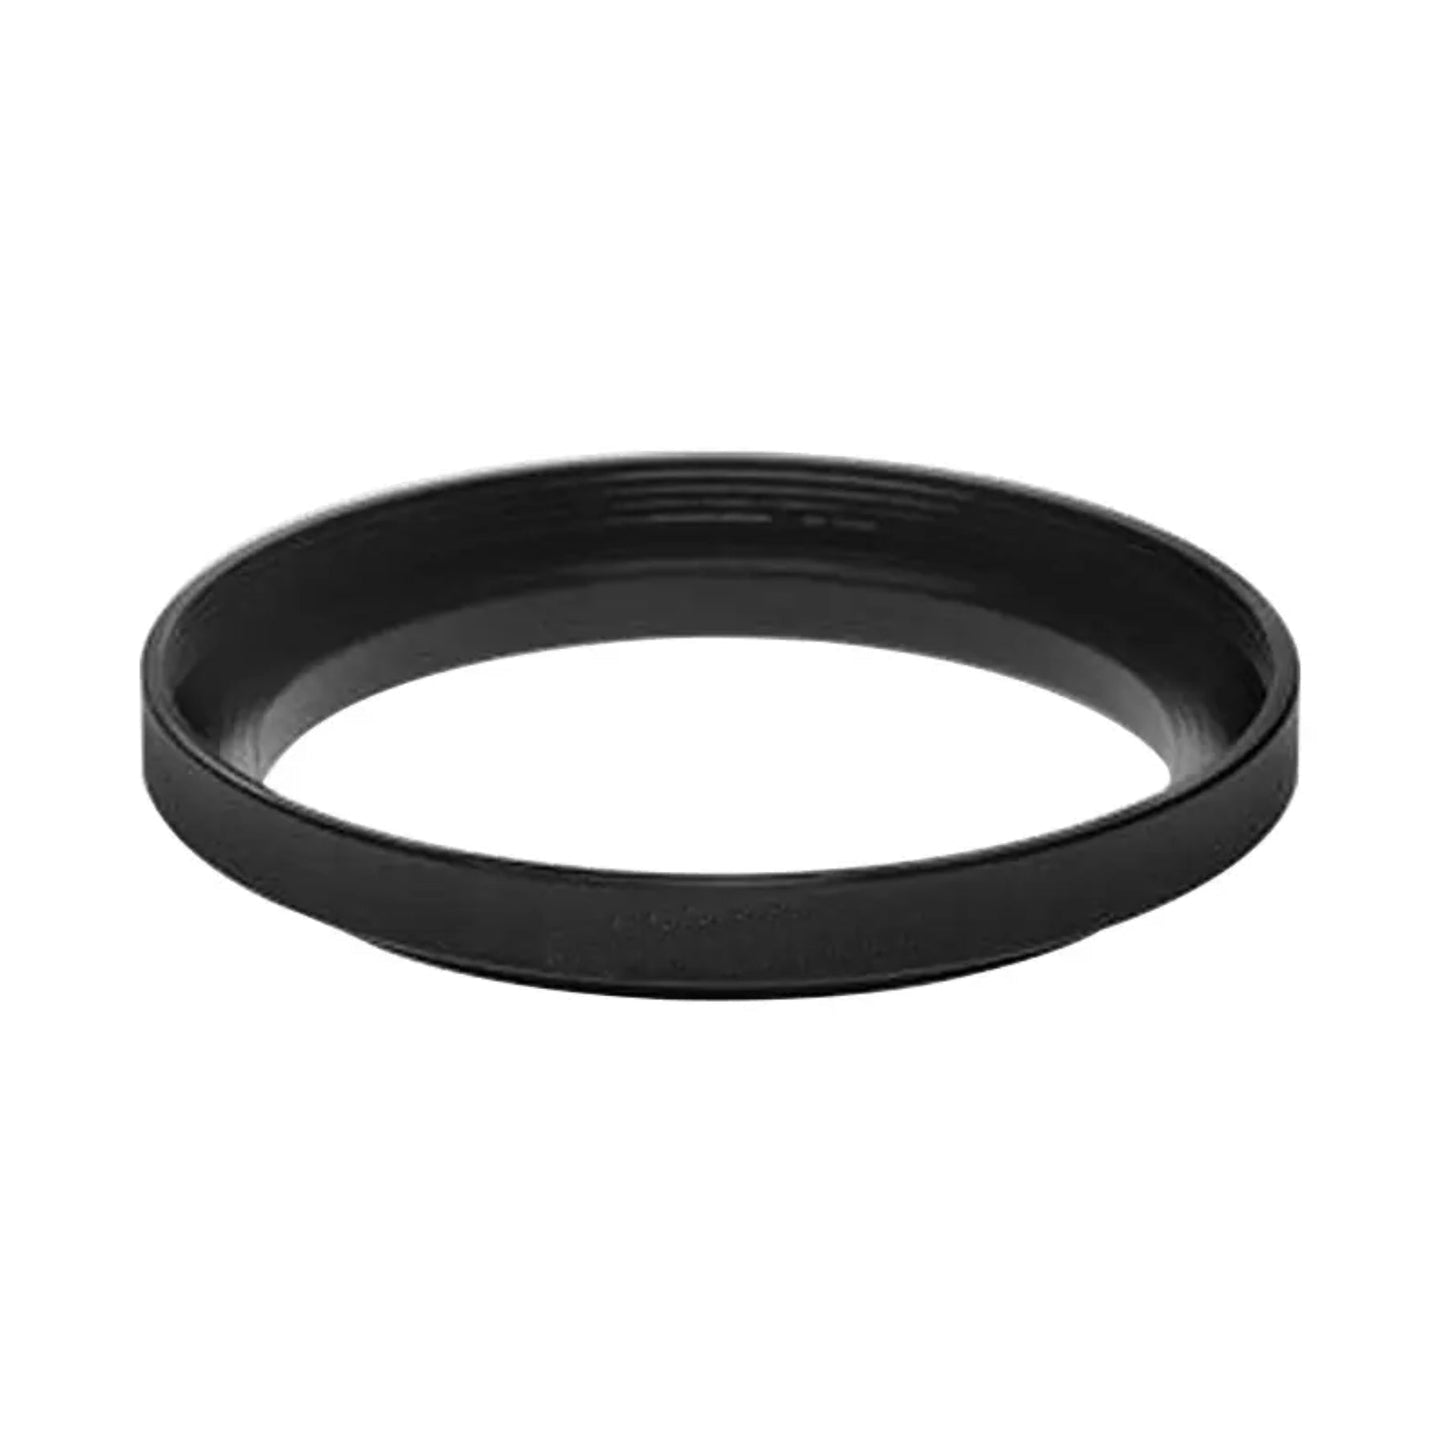 Hire Step Up Ring - 62 to 72mm at Topic Rentals